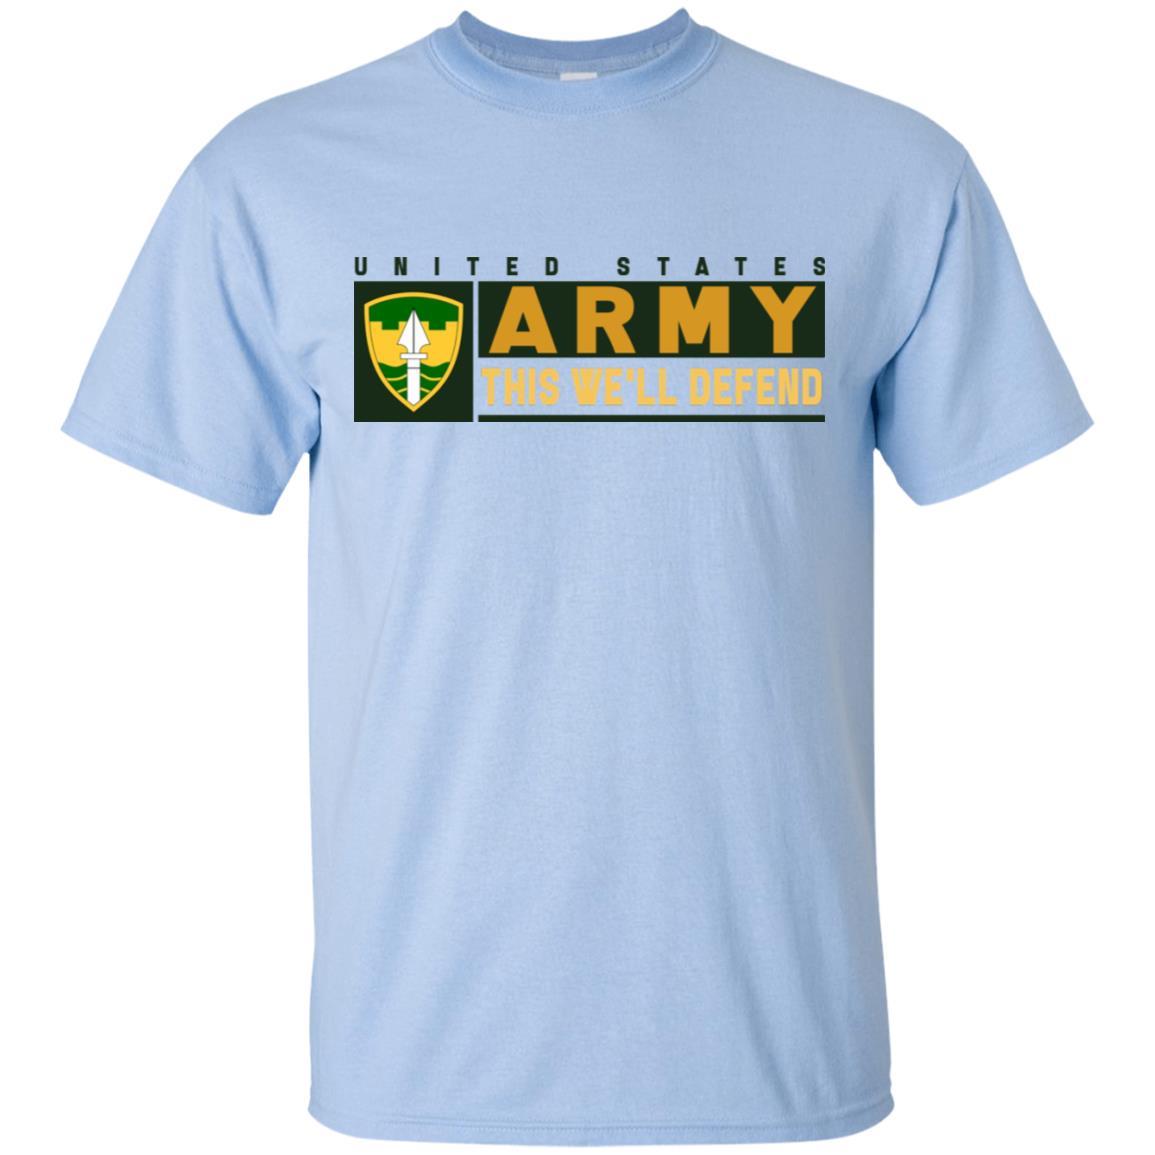 US Army 43 MILITARY POLICE BRIGADE- This We'll Defend T-Shirt On Front For Men-TShirt-Army-Veterans Nation